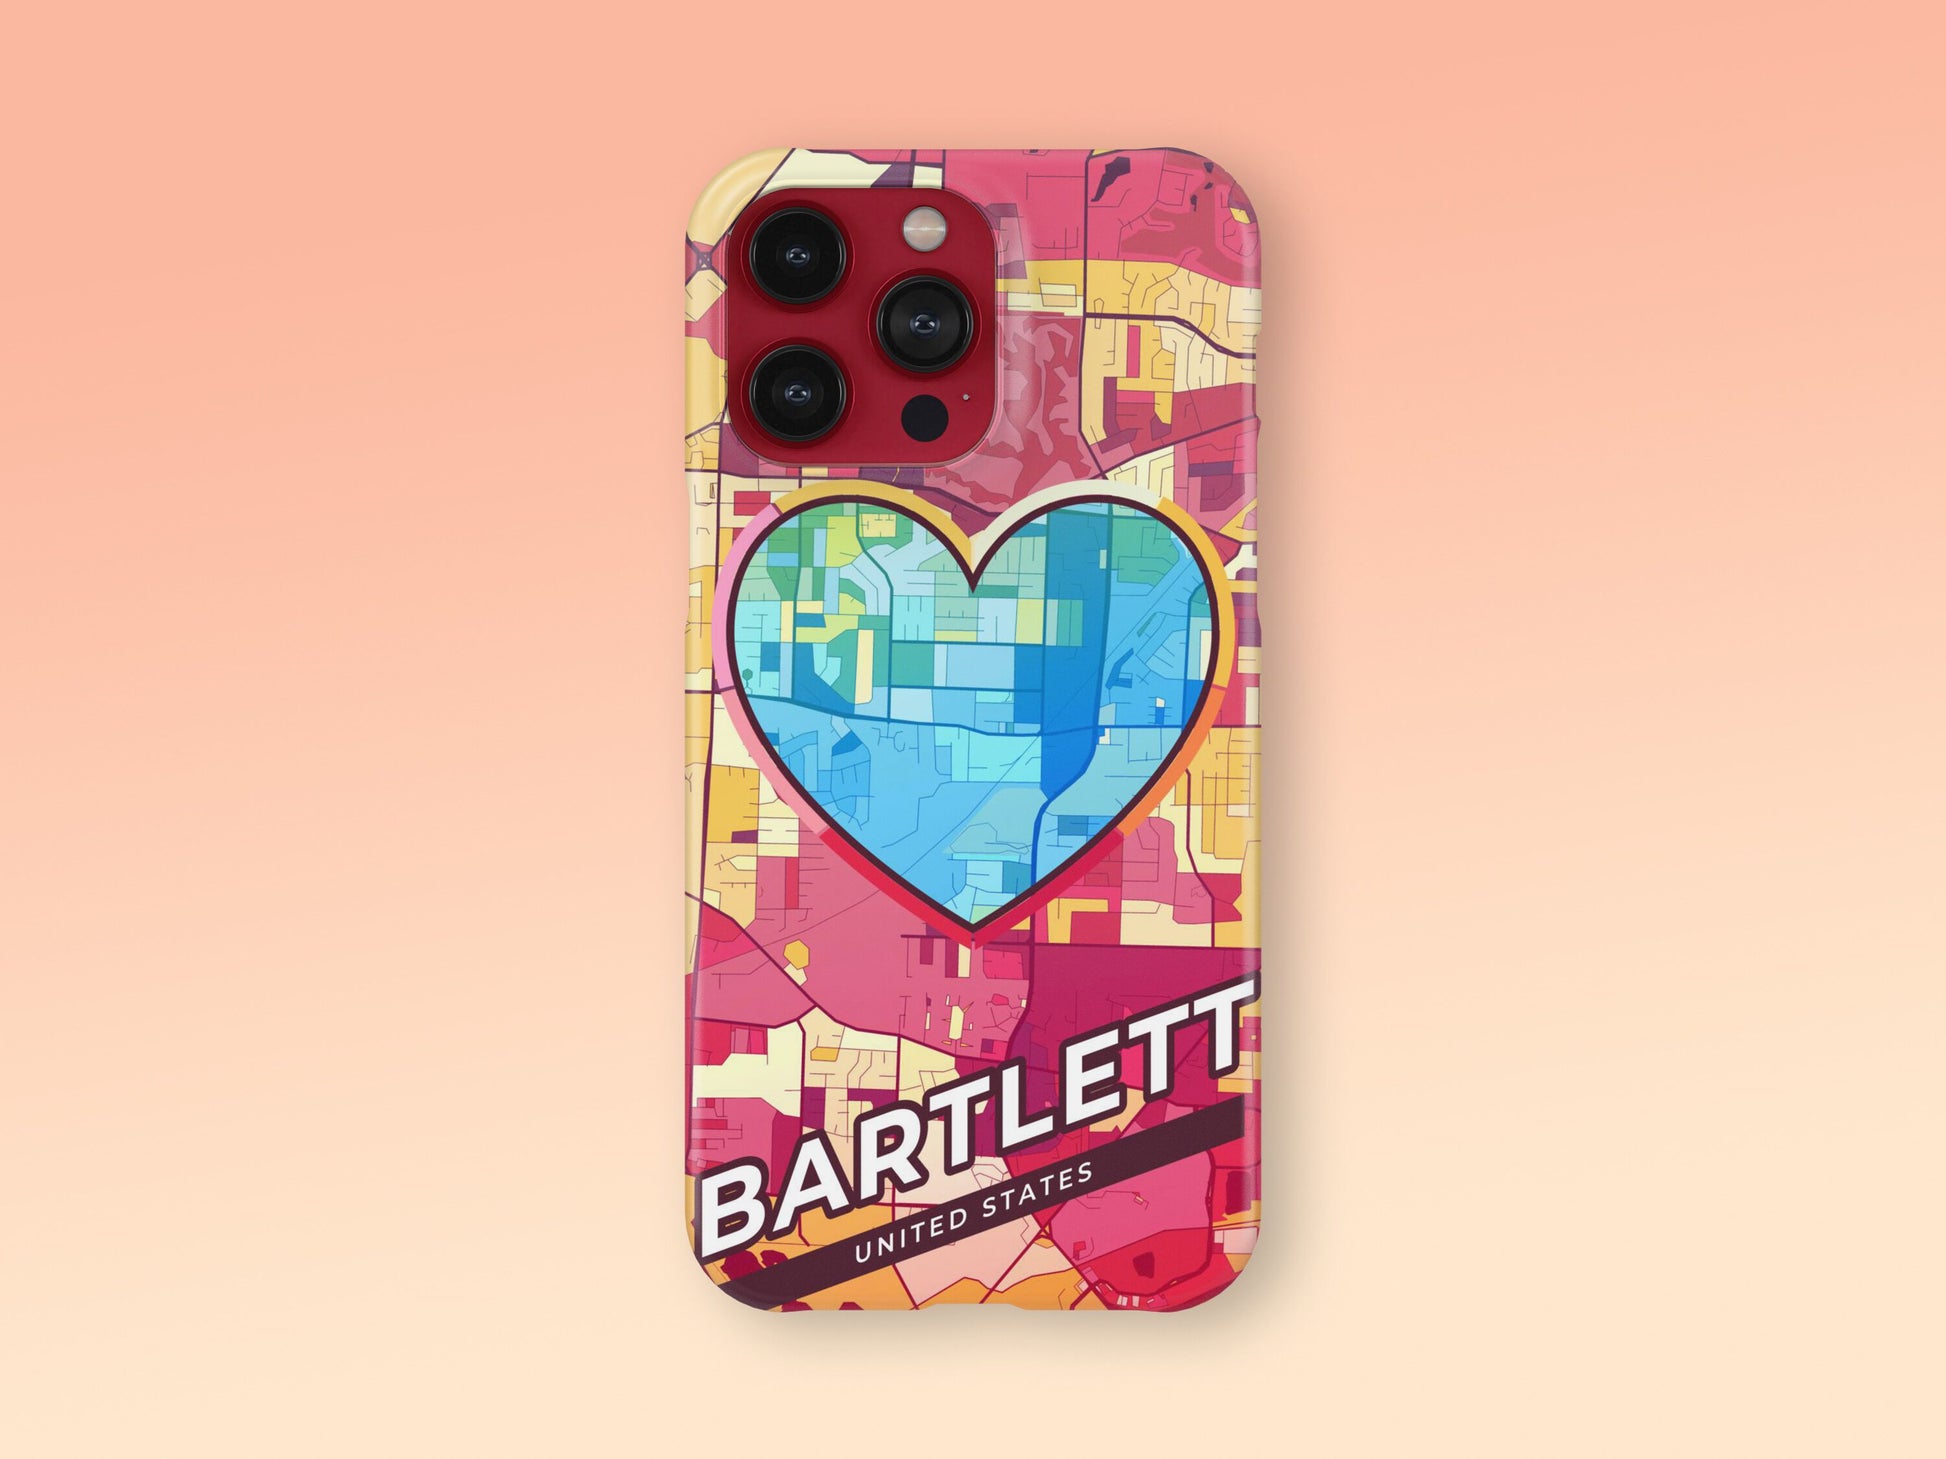 Bartlett Tennessee slim phone case with colorful icon. Birthday, wedding or housewarming gift. Couple match cases. 2